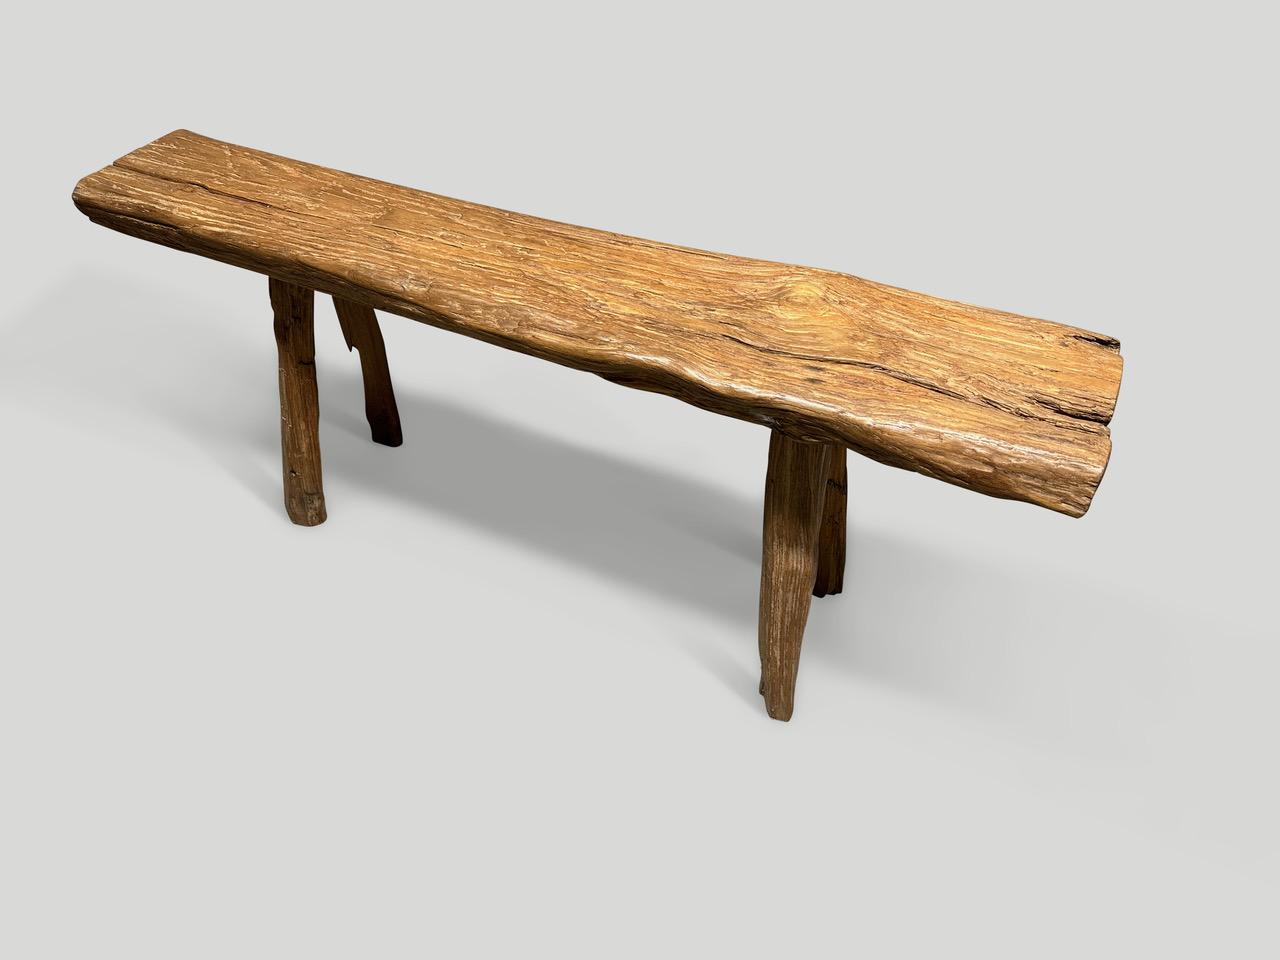 Andrianna Shamaris Antique Log Style Teak Wood Bench In Excellent Condition For Sale In New York, NY